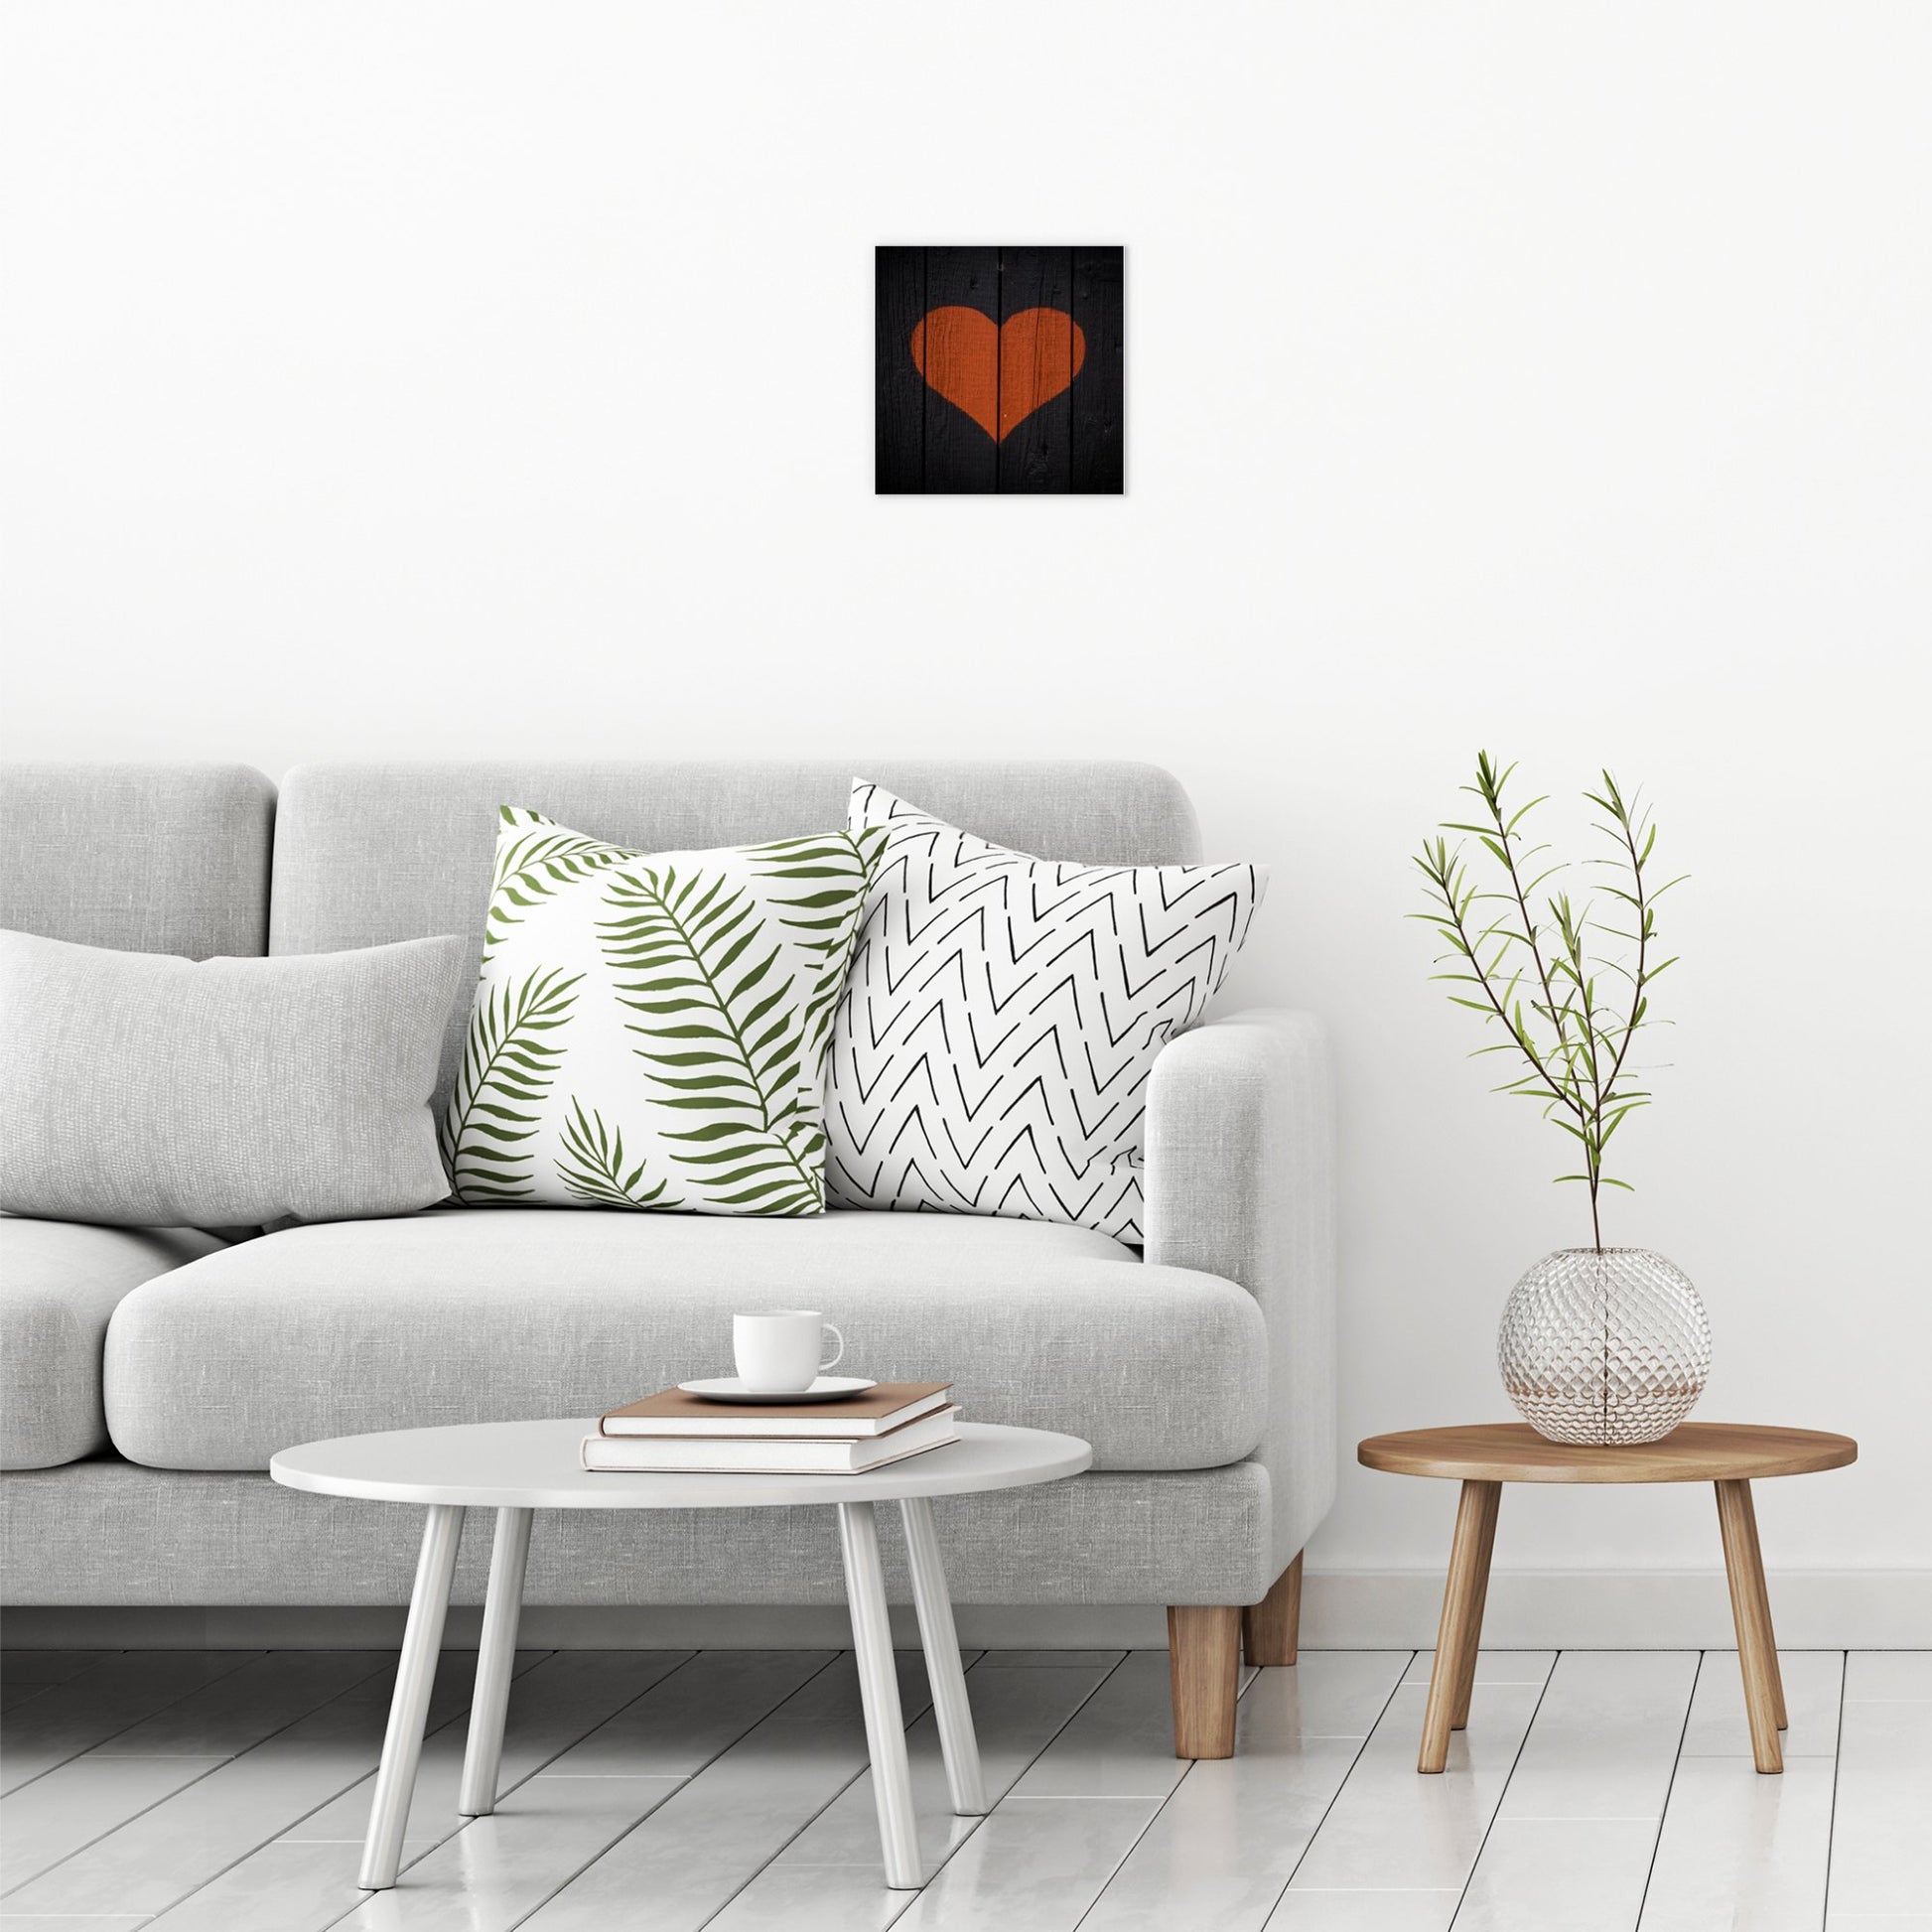 A contemporary modern room view showing a small size metal art poster display plate with printed design of a Painted Wooden Heart